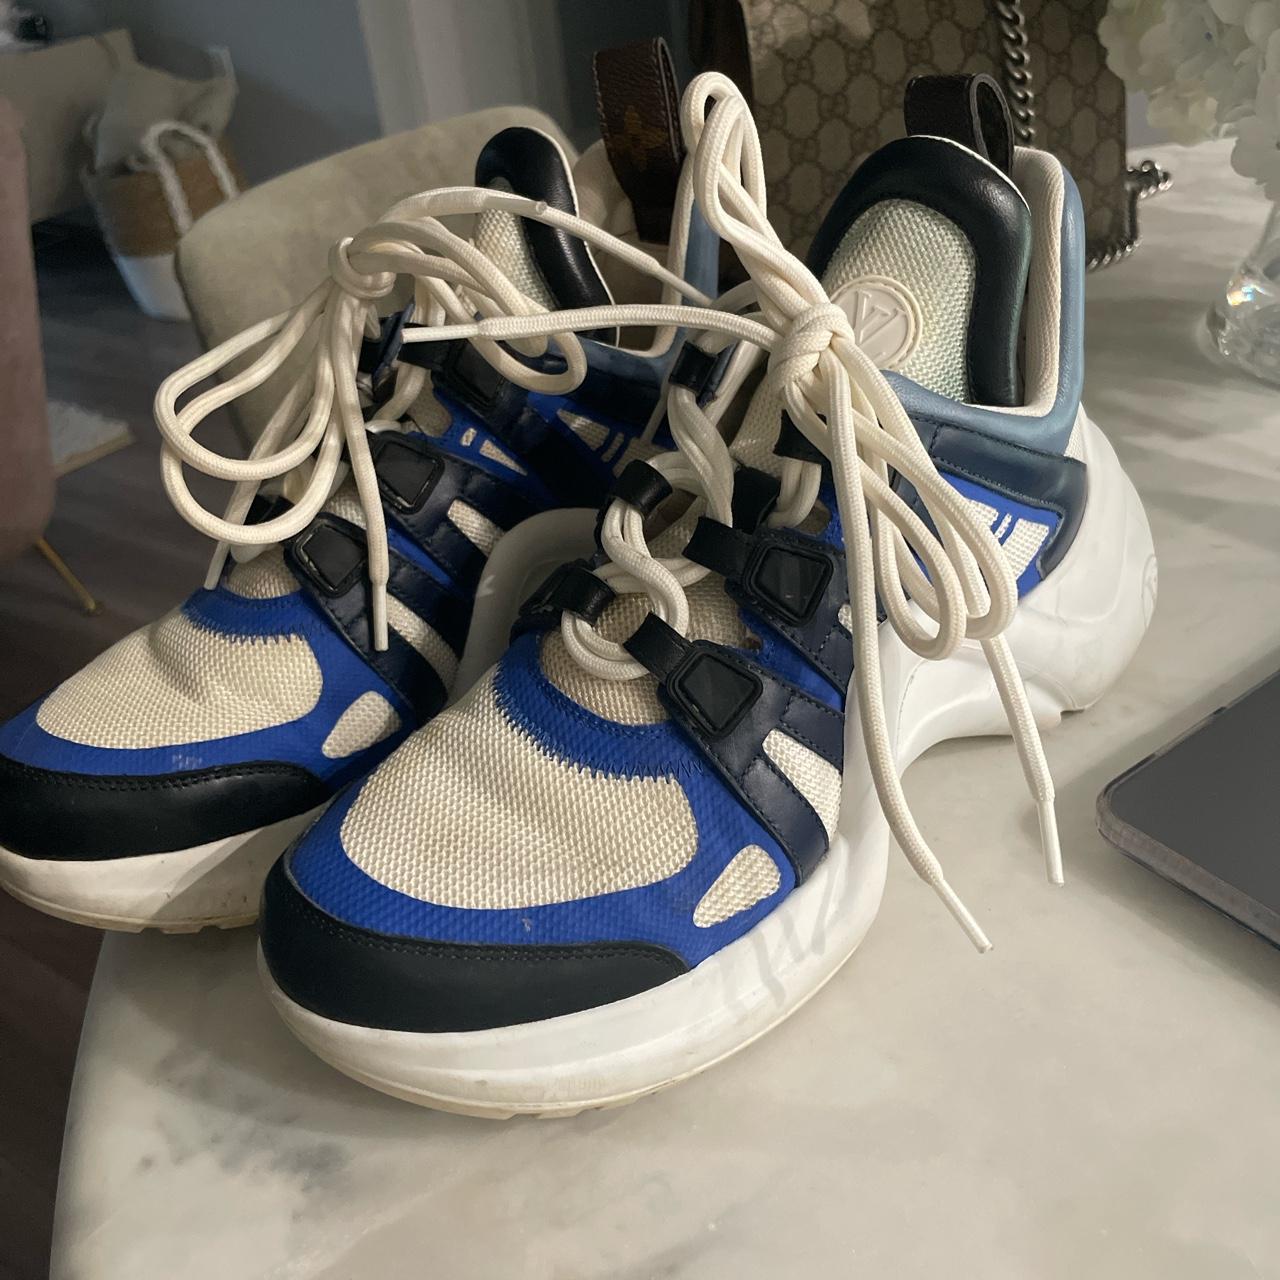 Louis Vuitton sneakers I bought them and they were a - Depop